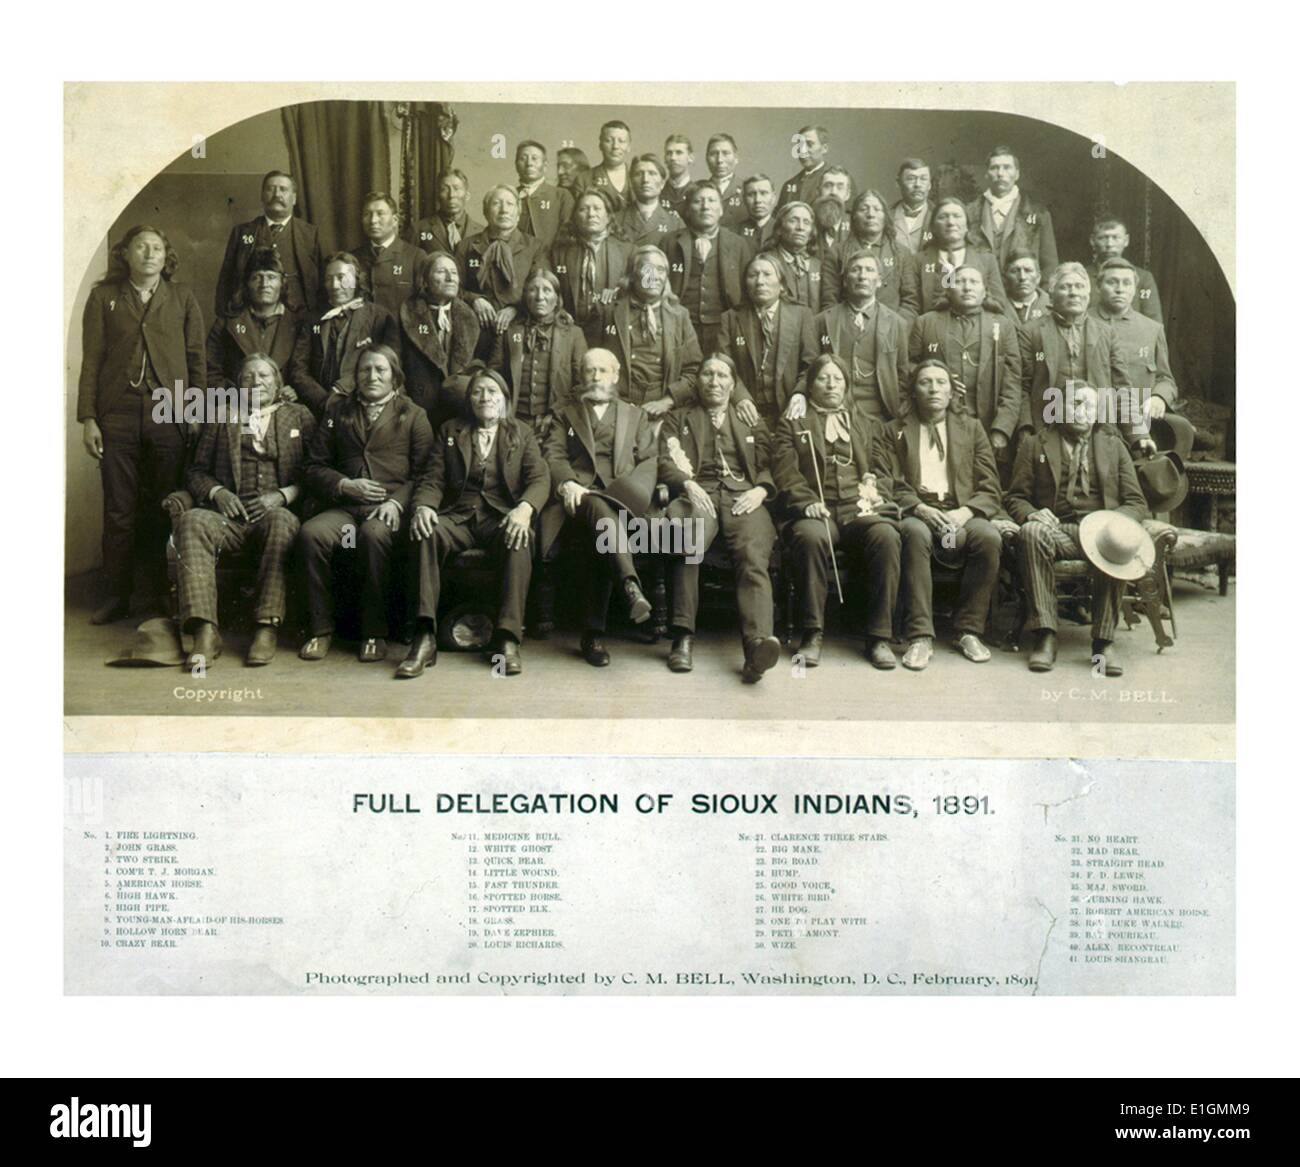 Portrait of delegation, along with T.J. Morgan; includes key to identifications. Stock Photo